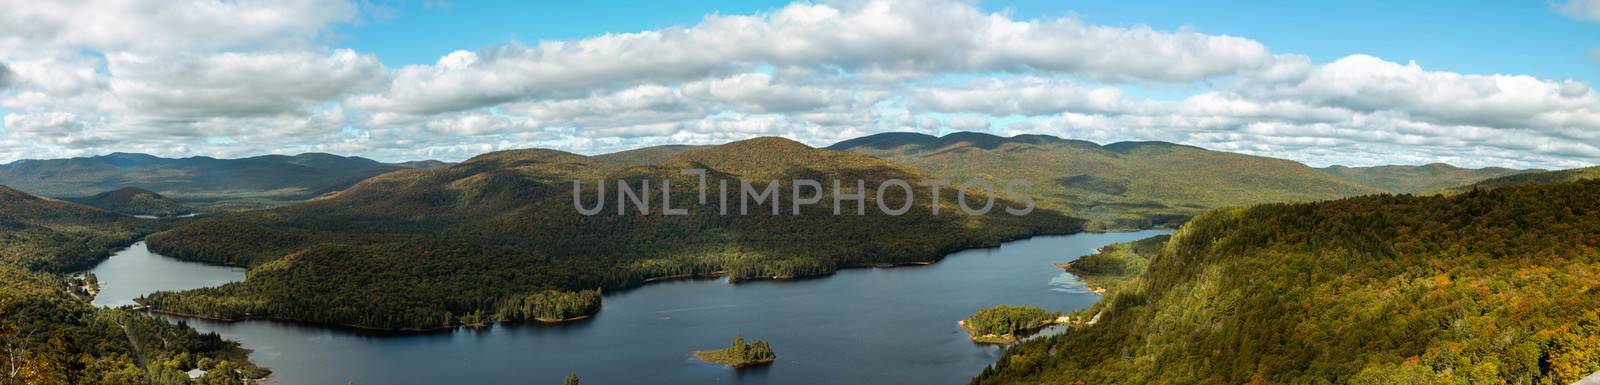 Quebec wilderness: Lac Monroe in Mont-Tremblant national park, Quebec, Canada in summer High quality photo